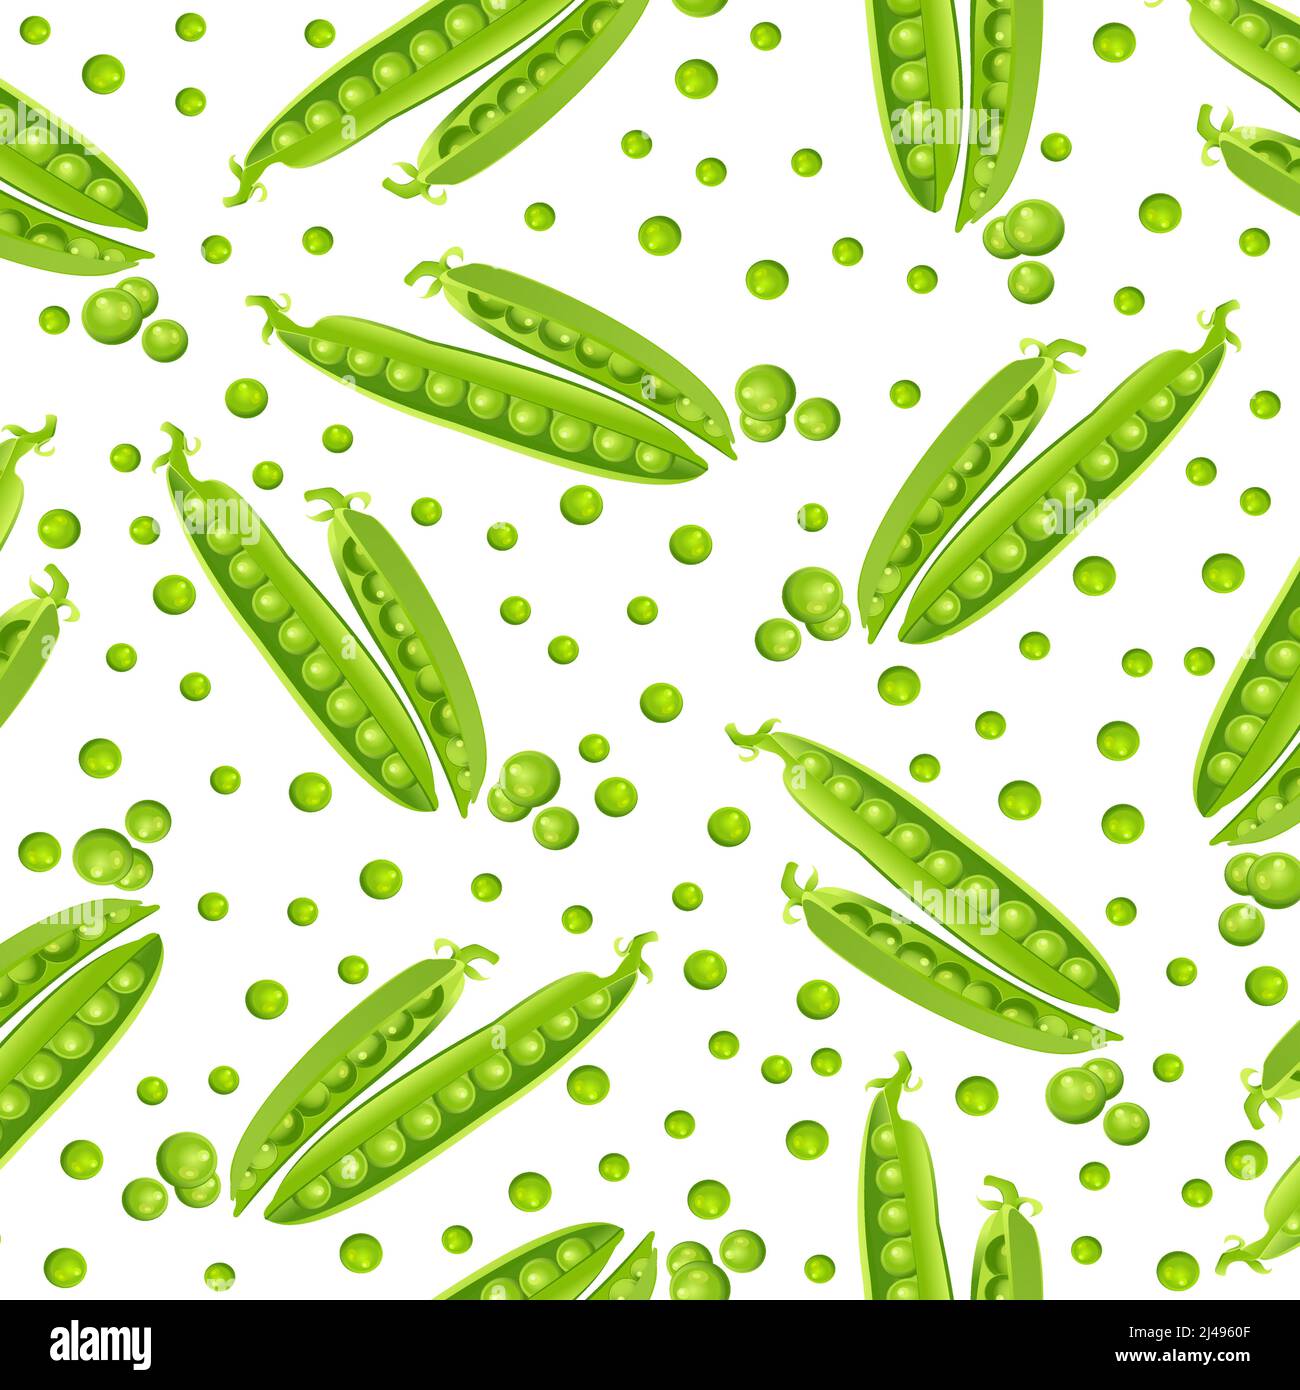 Seamless vector vegetables pattern green pea pods, isolated on white background Stock Vector